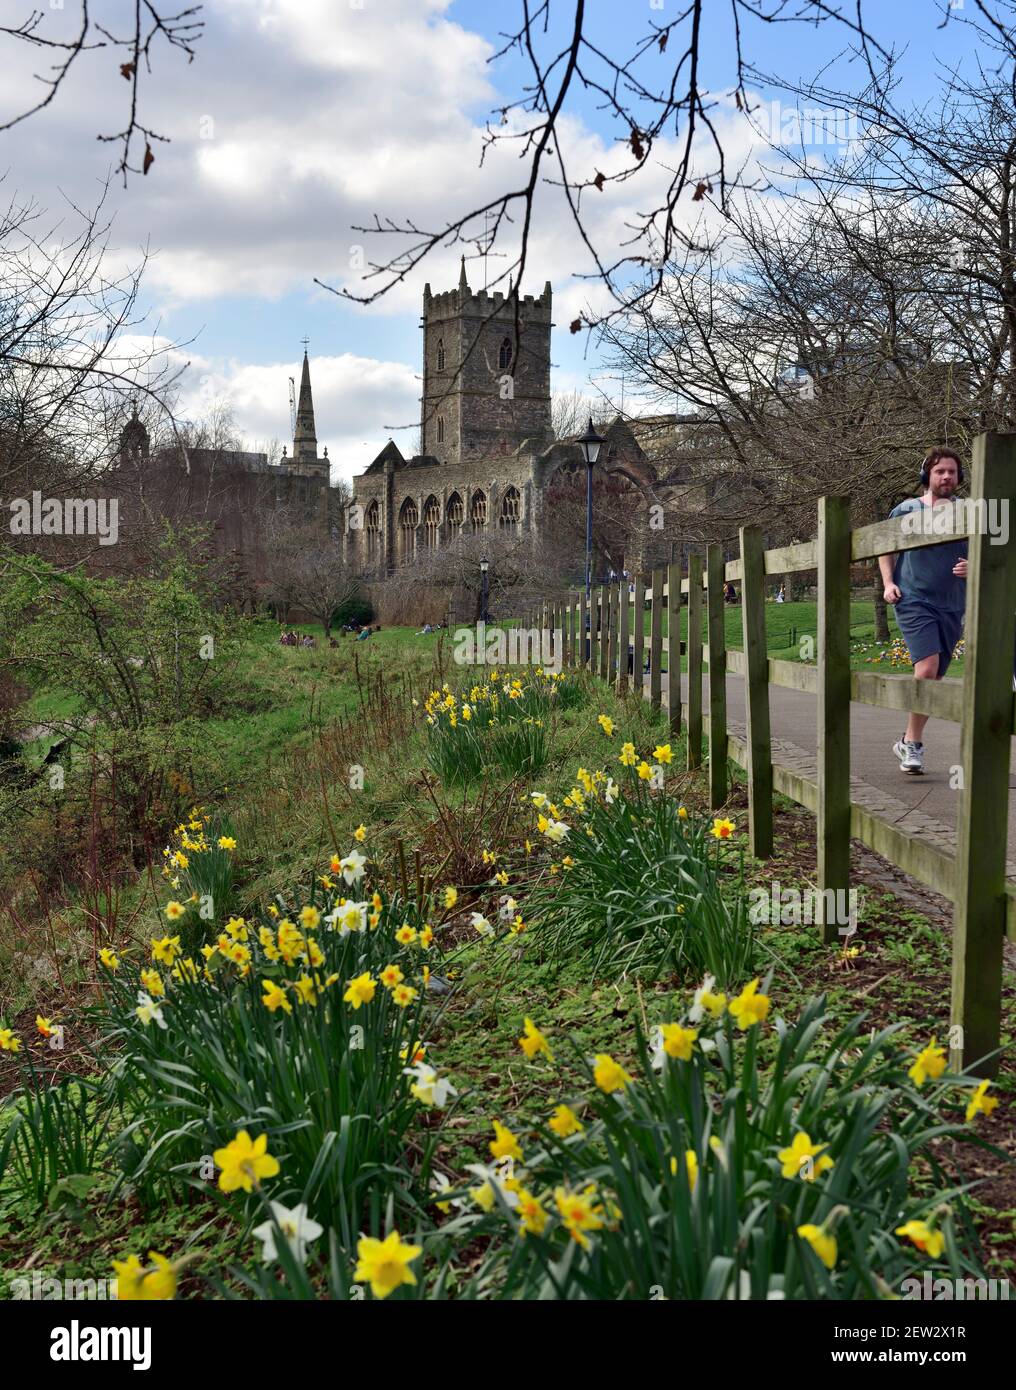 Bristol Castle Park and Historic St Peter's Church winter day almost spring daffodils, jogging on path, UK Stock Photo